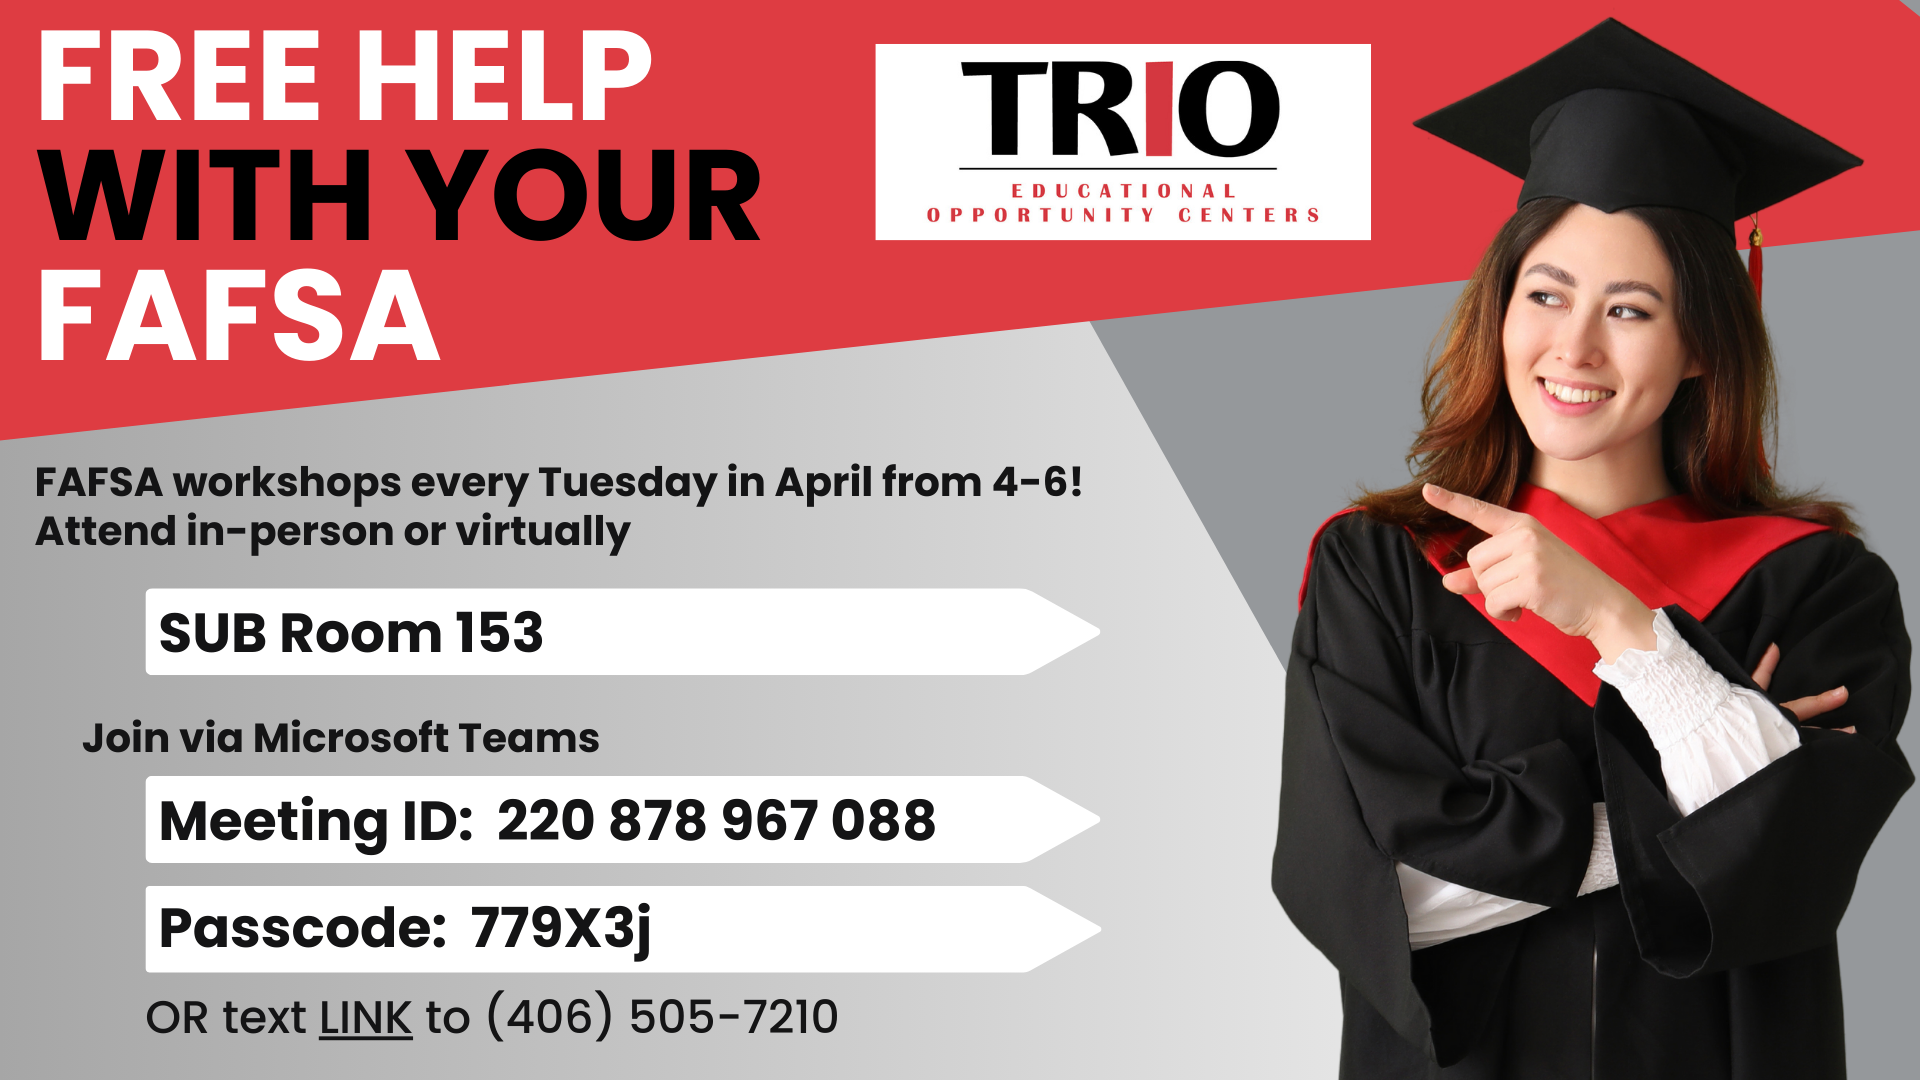 Free help with your FAFSA. FAFSA workshops every Tuesday in April frim 4-6! Attend in-person in the SUB, Room 153 or virtually via Microsoft Teams with the Meeting ID: 220 878 967 088 and passcode: 779x3j or text LINK to (406) 505-7210.